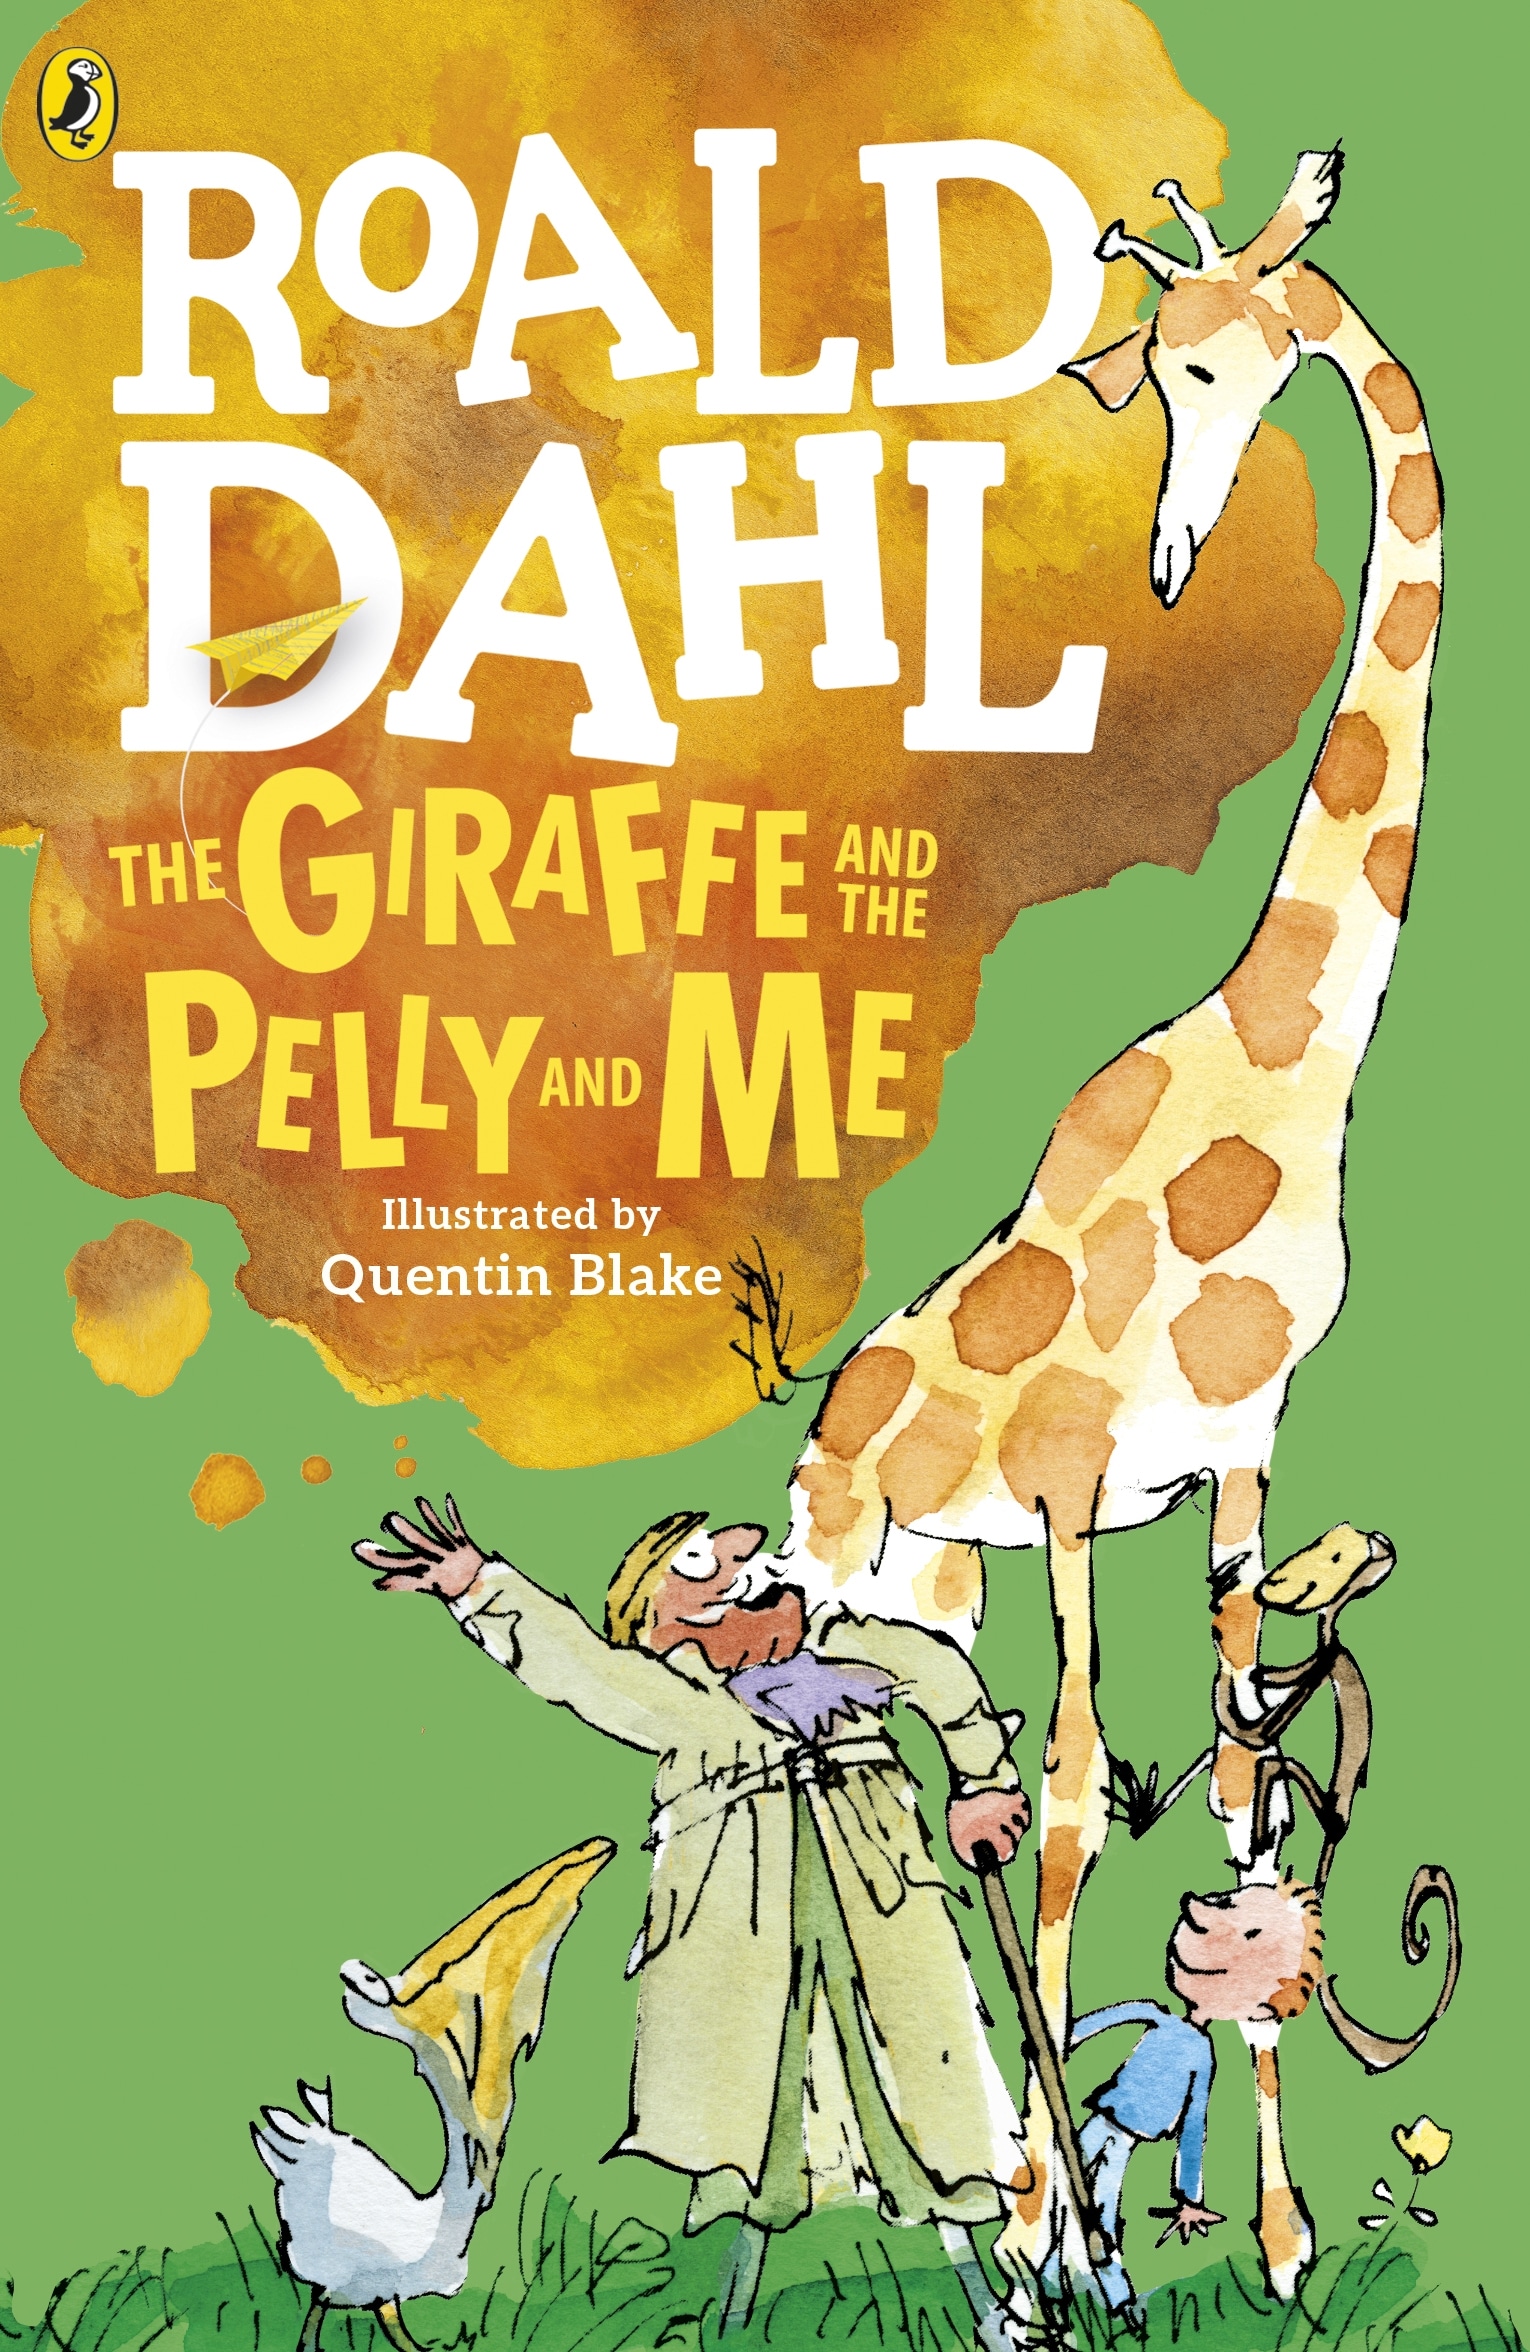 Book “The Giraffe and the Pelly and Me” by Roald Dahl — February 11, 2016